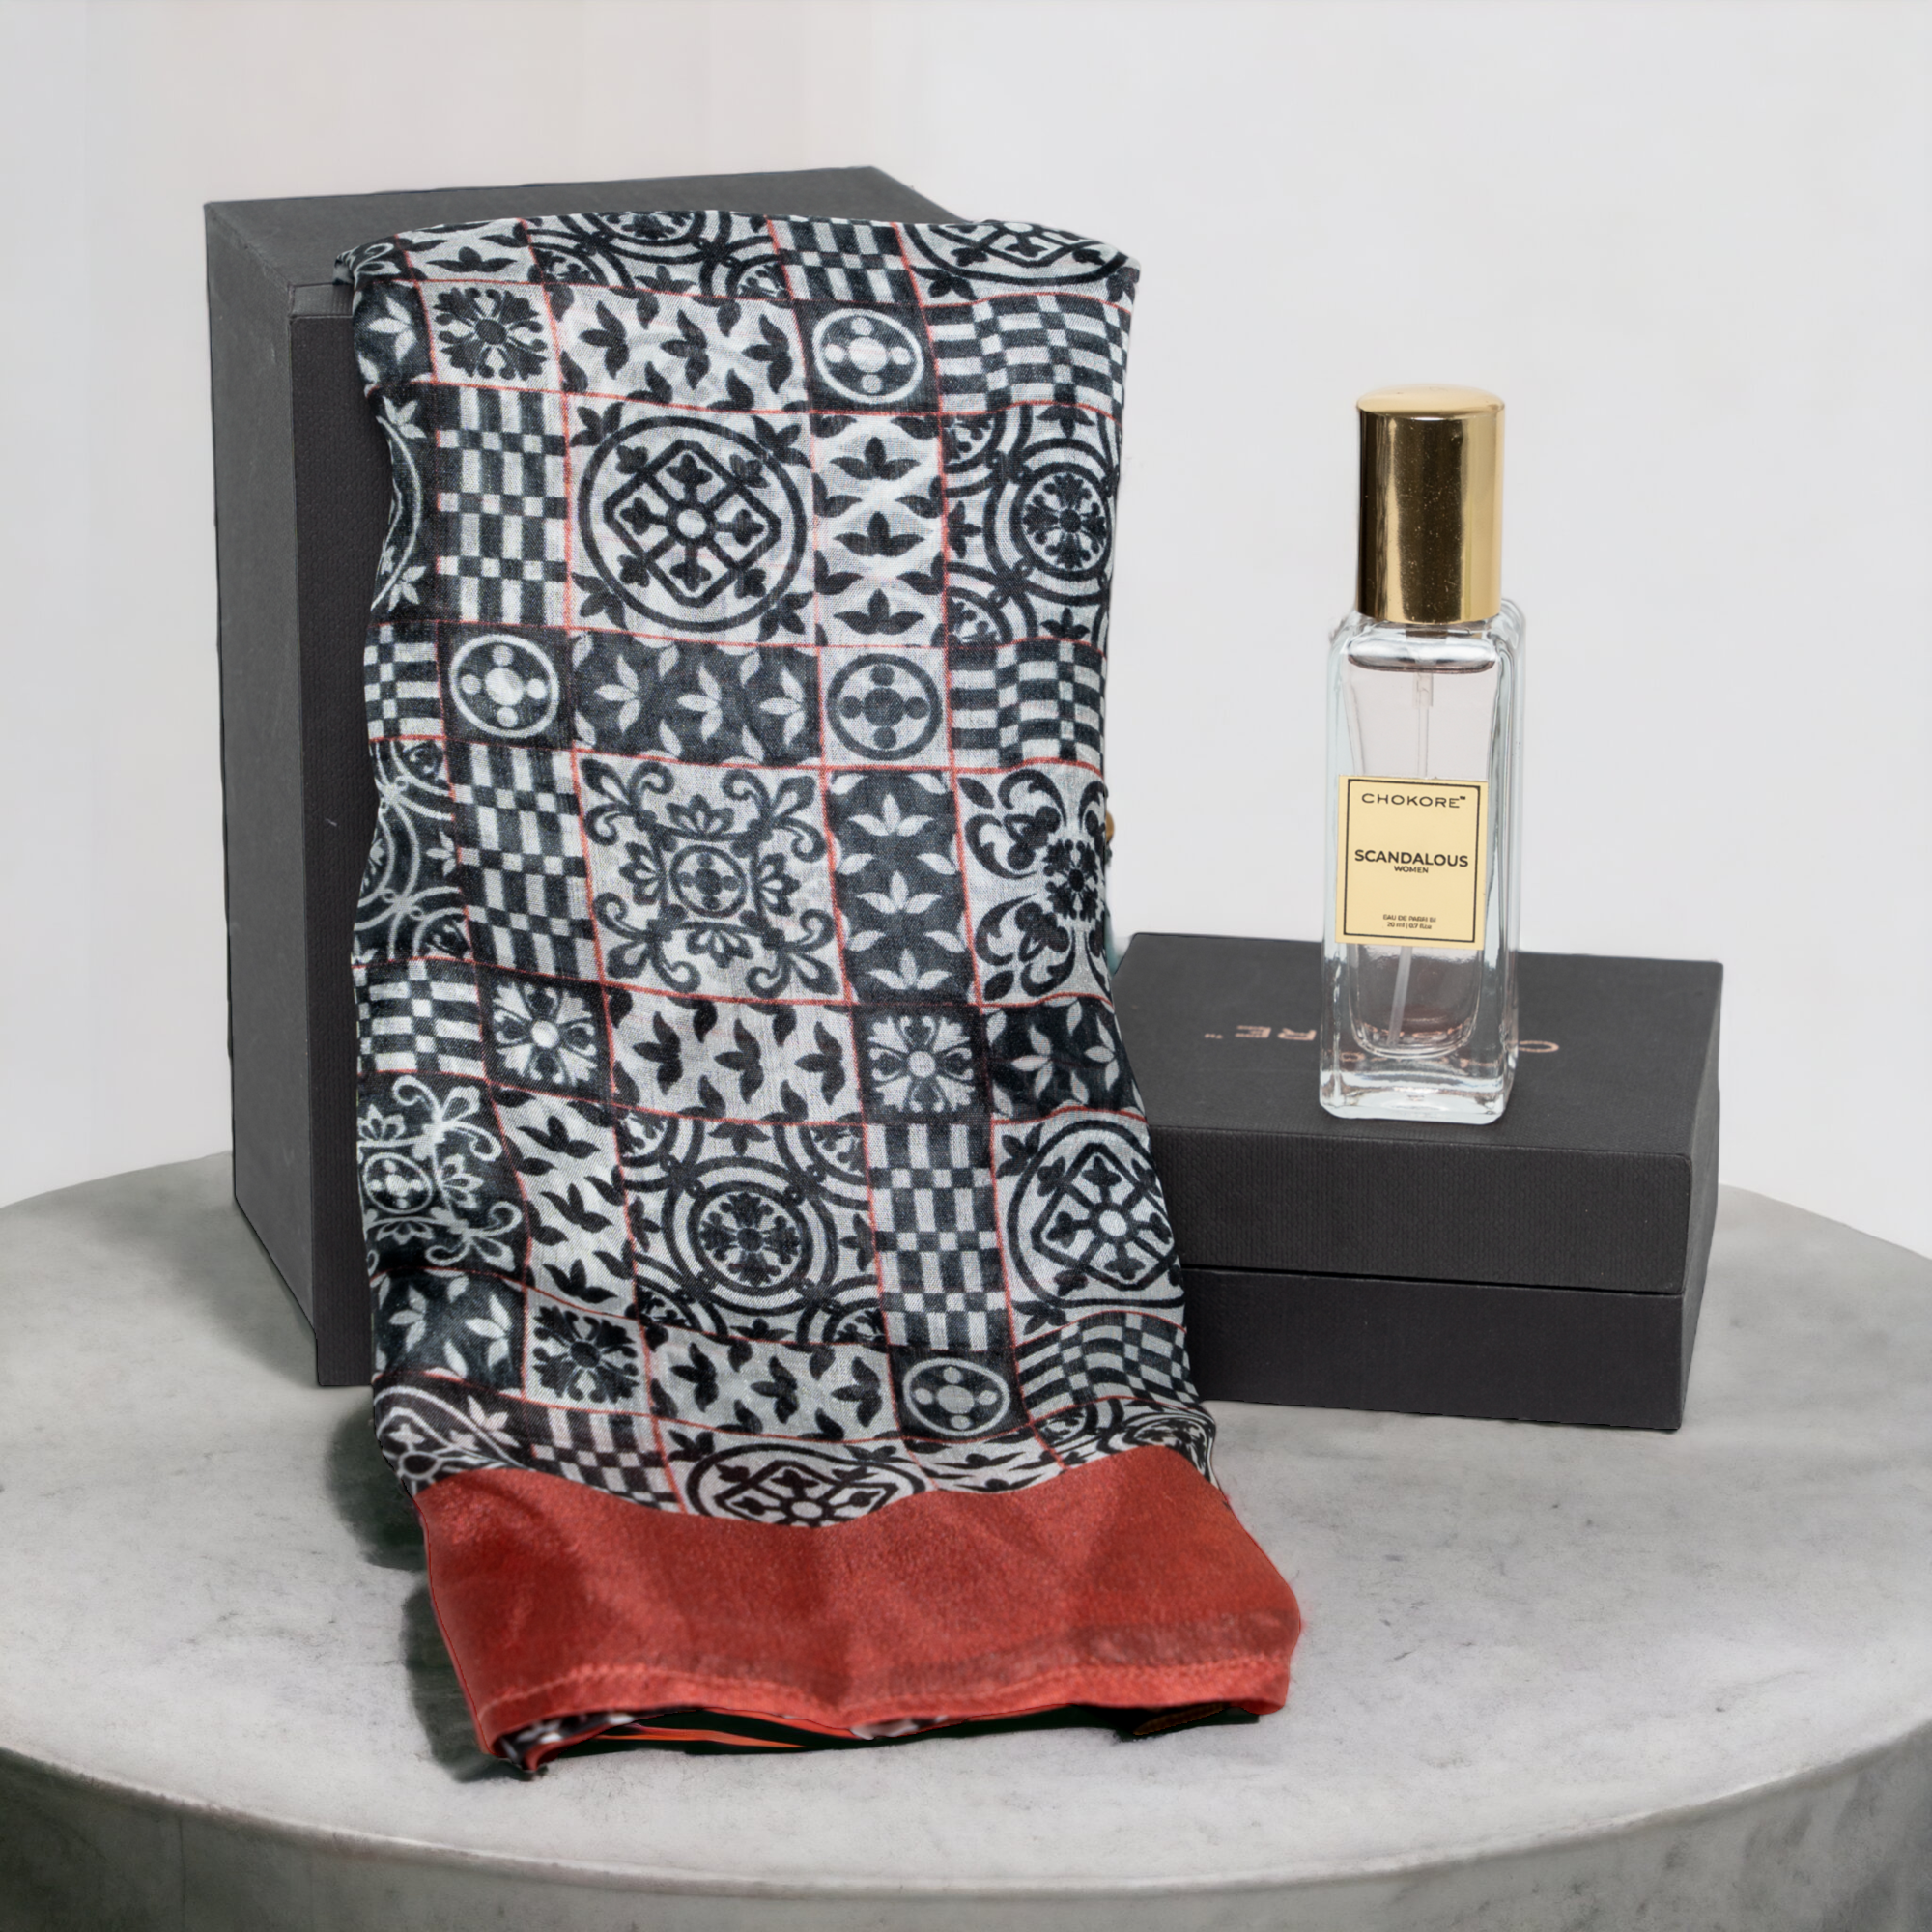 Chokore Special 2-in-1 Gift Set for Her (Printed Stole & 20 ml Scandalous Perfume)